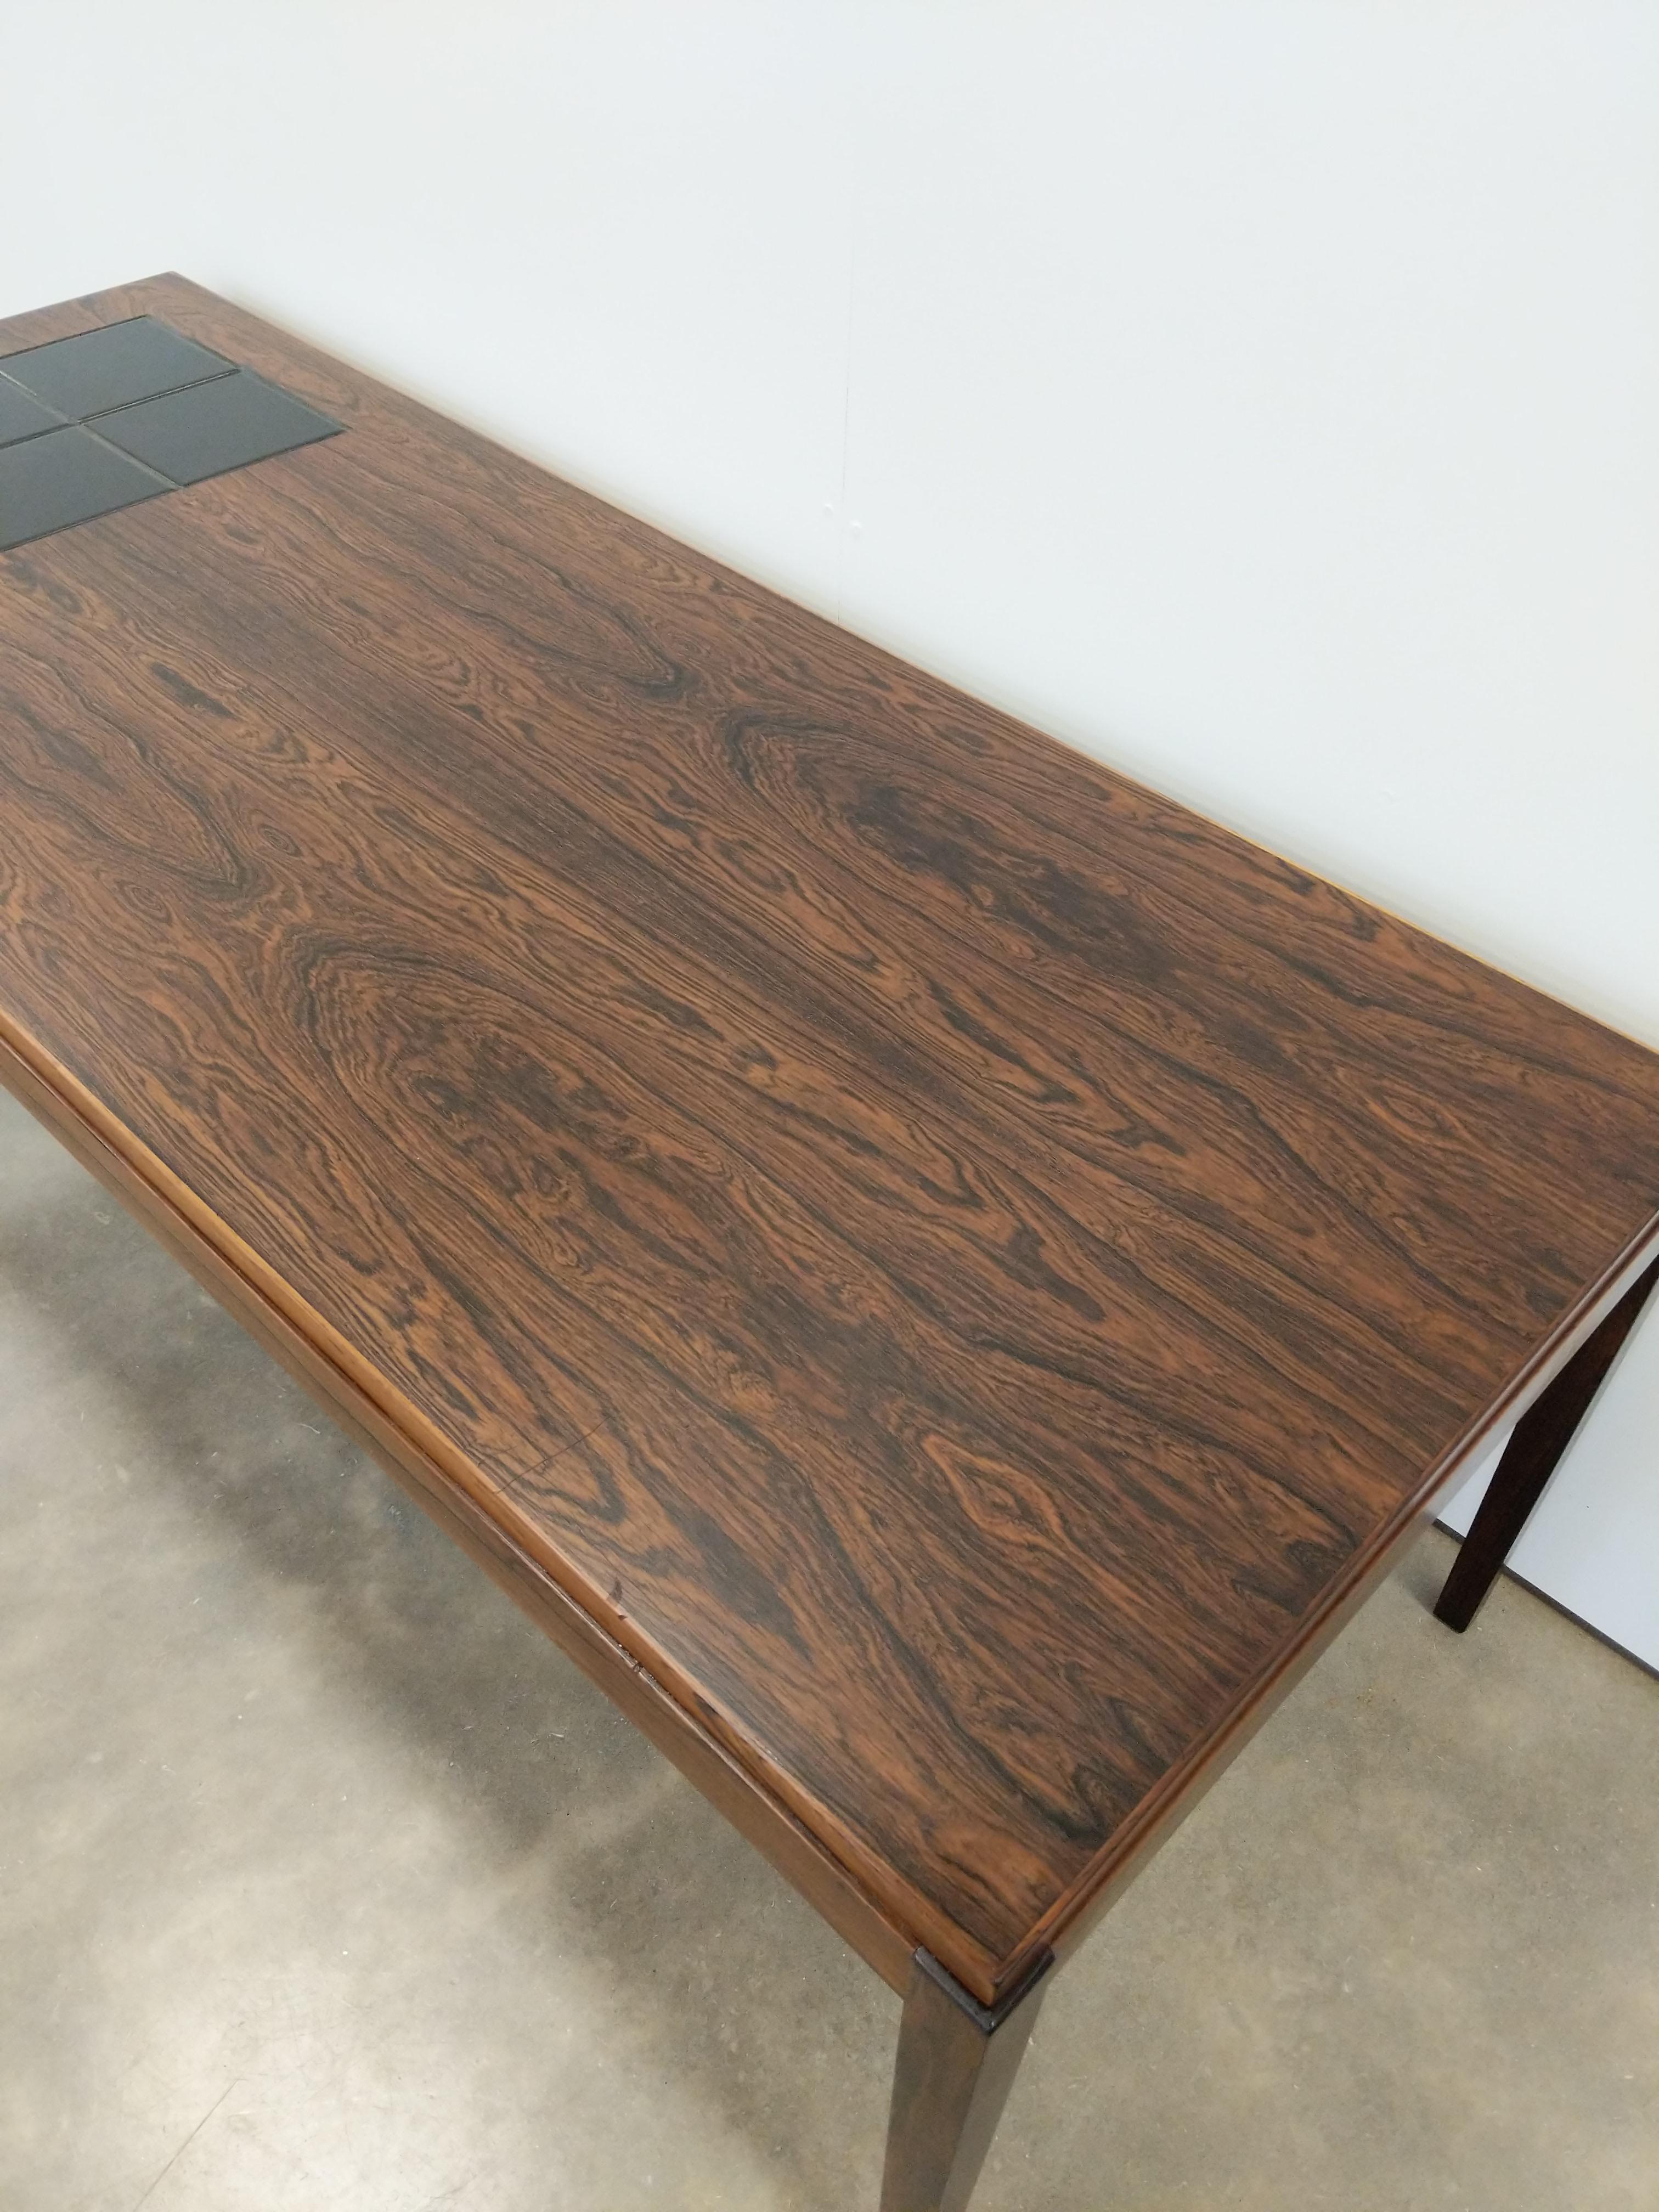 Vintage Danish Mid Century Modern Rosewood Coffee Table In Good Condition For Sale In Gardiner, NY